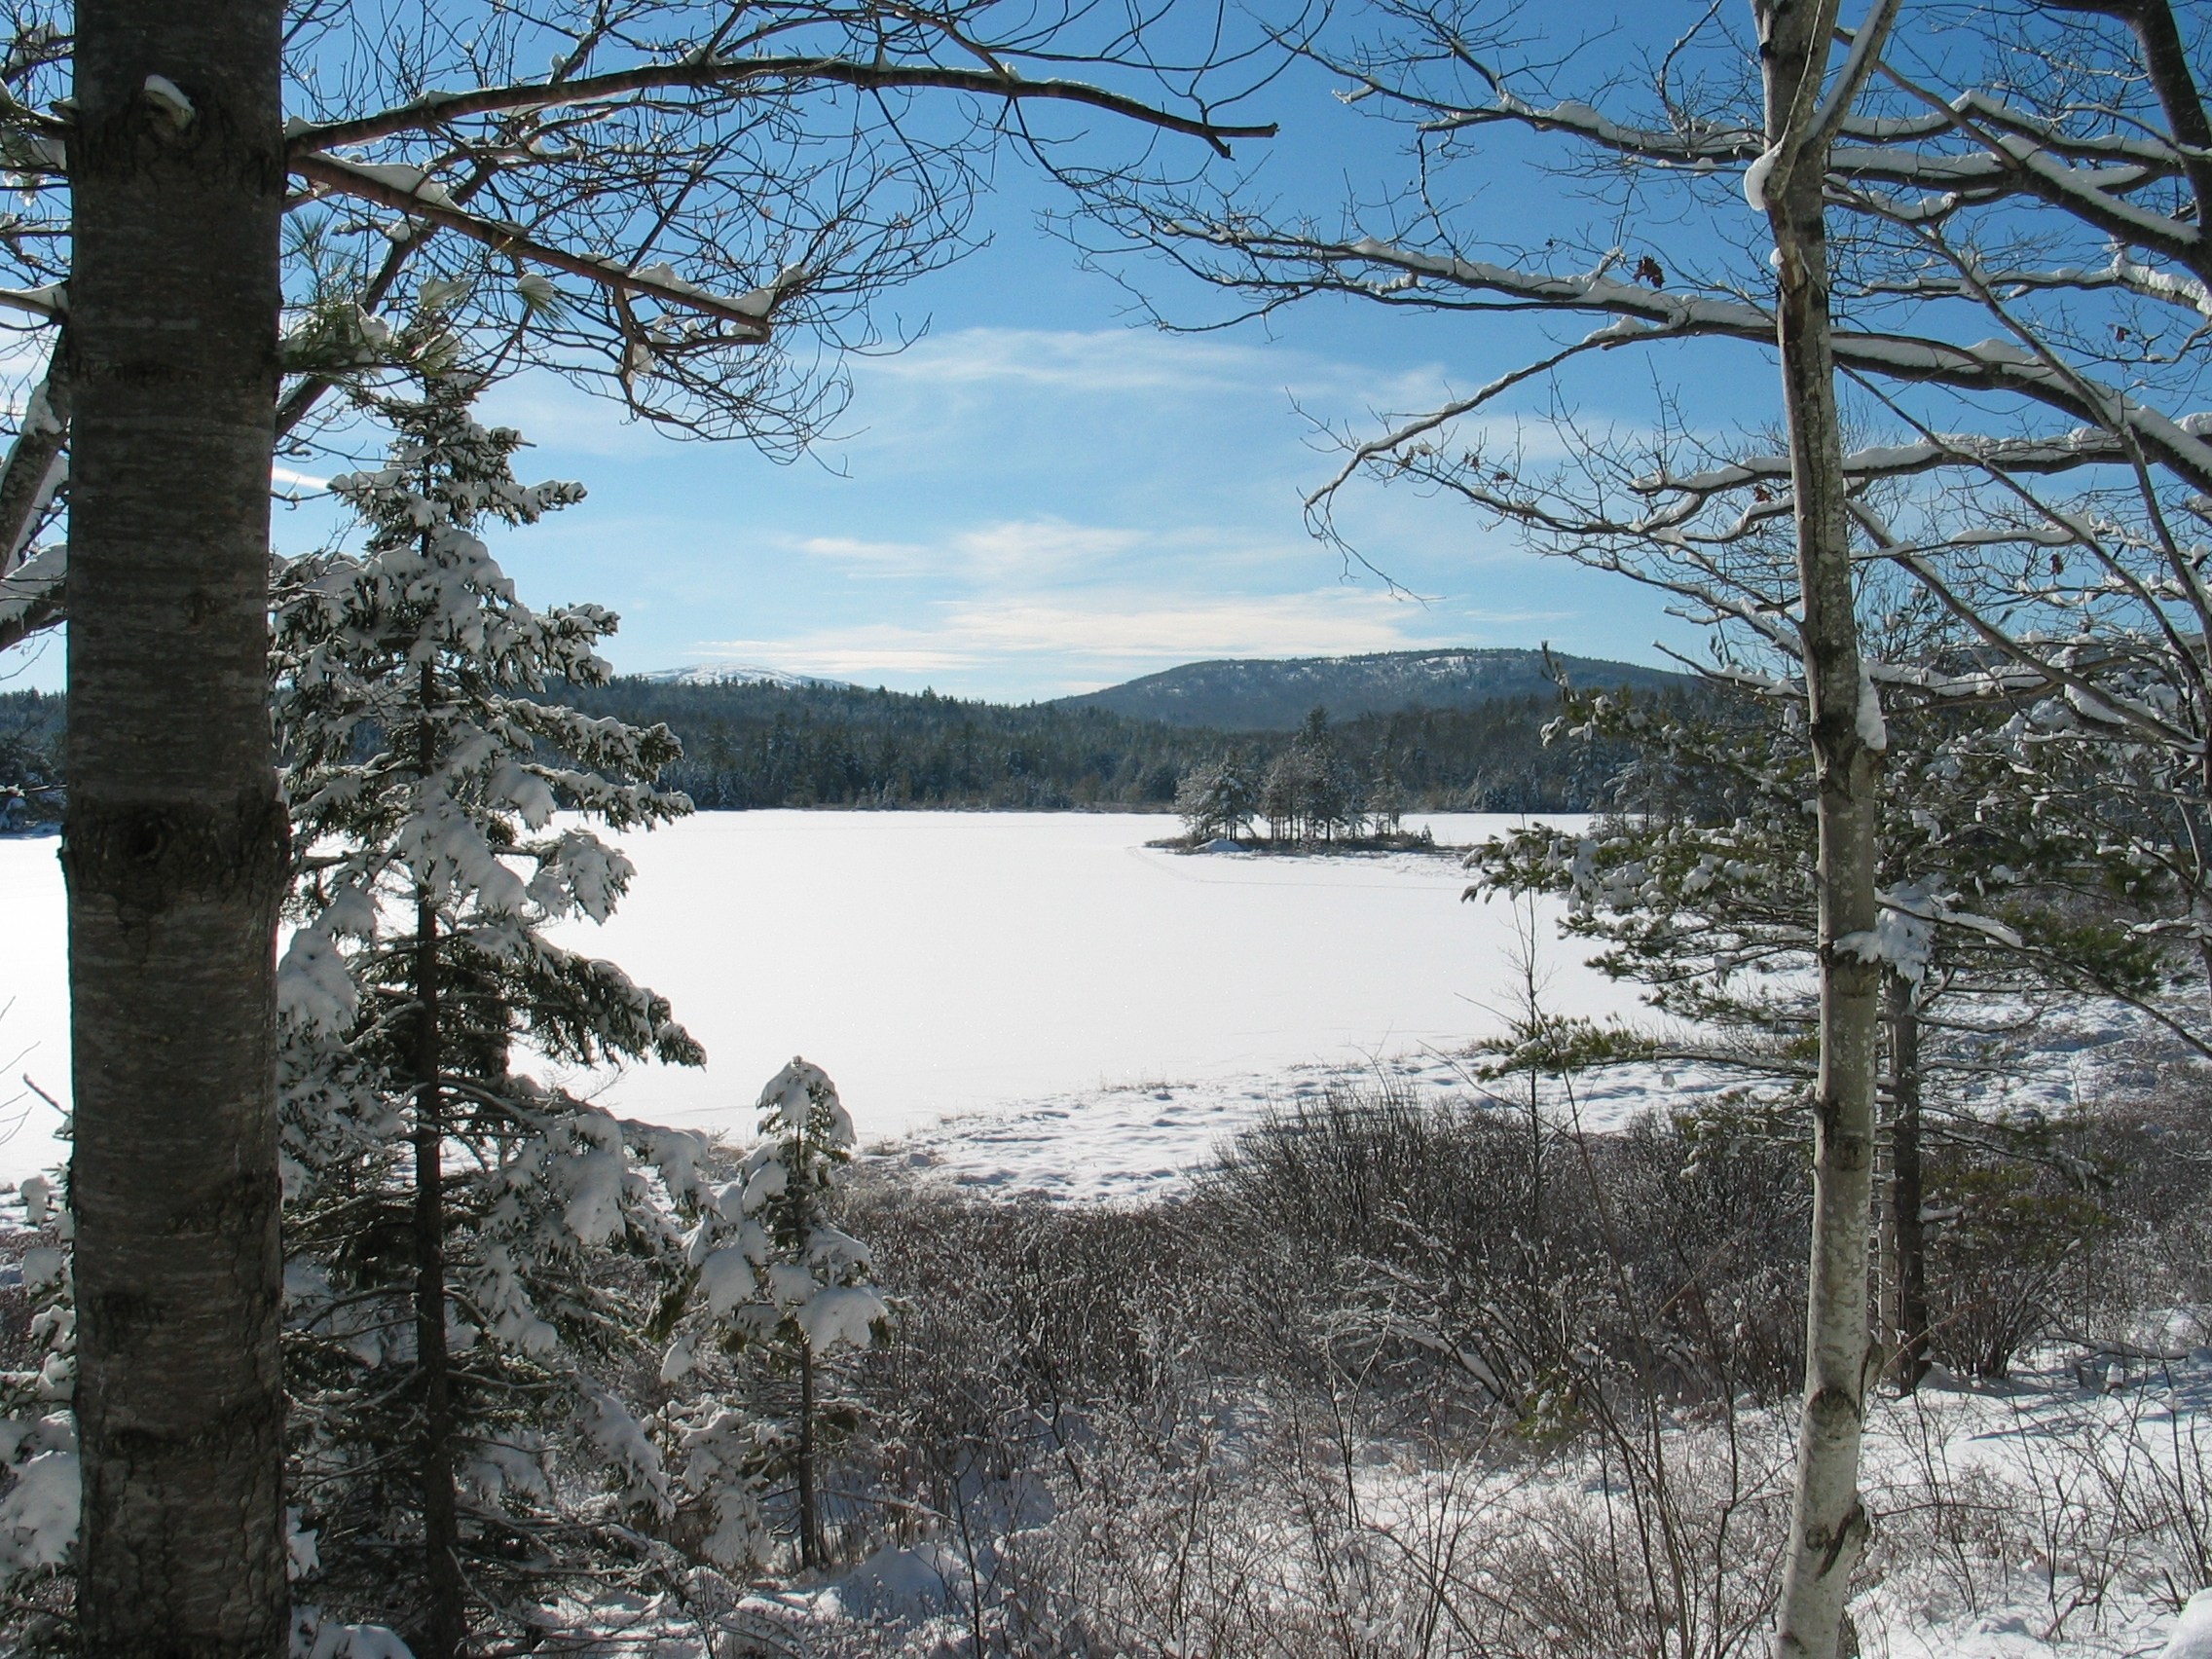 Planning a trip to Acadia in winter? Ask Acadia on My Mind!